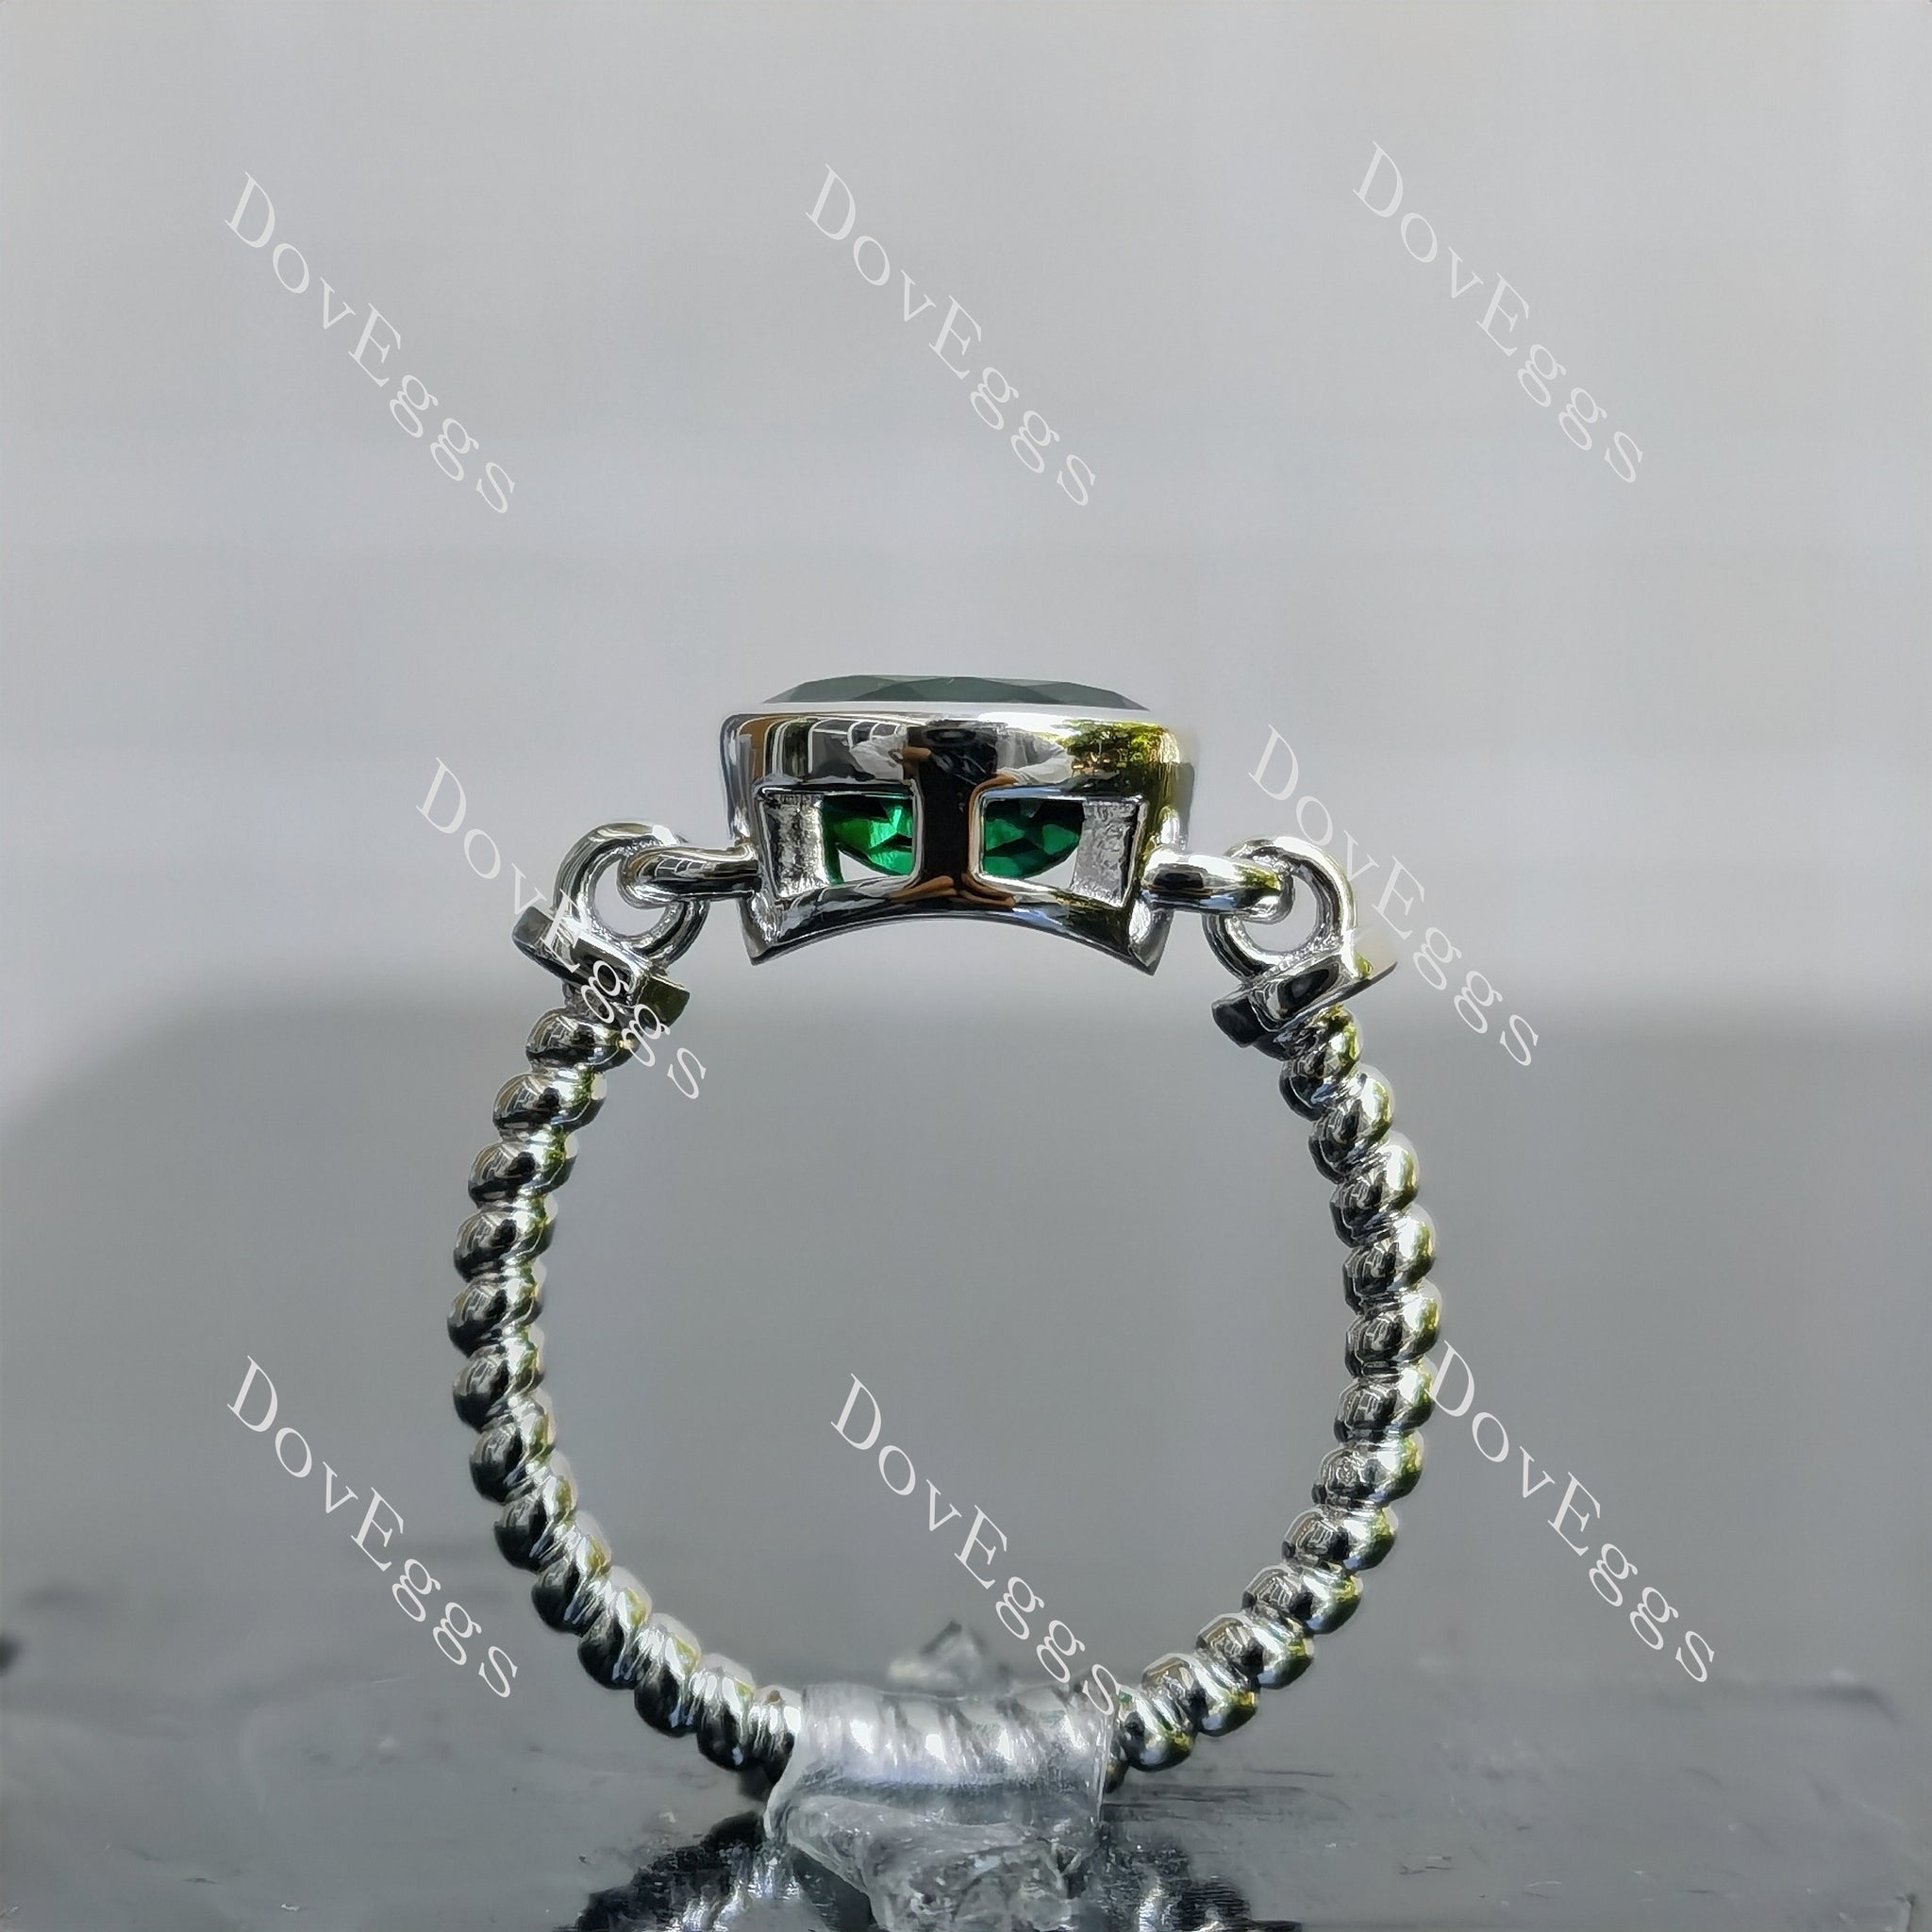 Doveggs oval solitaire bezel zambia emerald coclored gem engagement ring